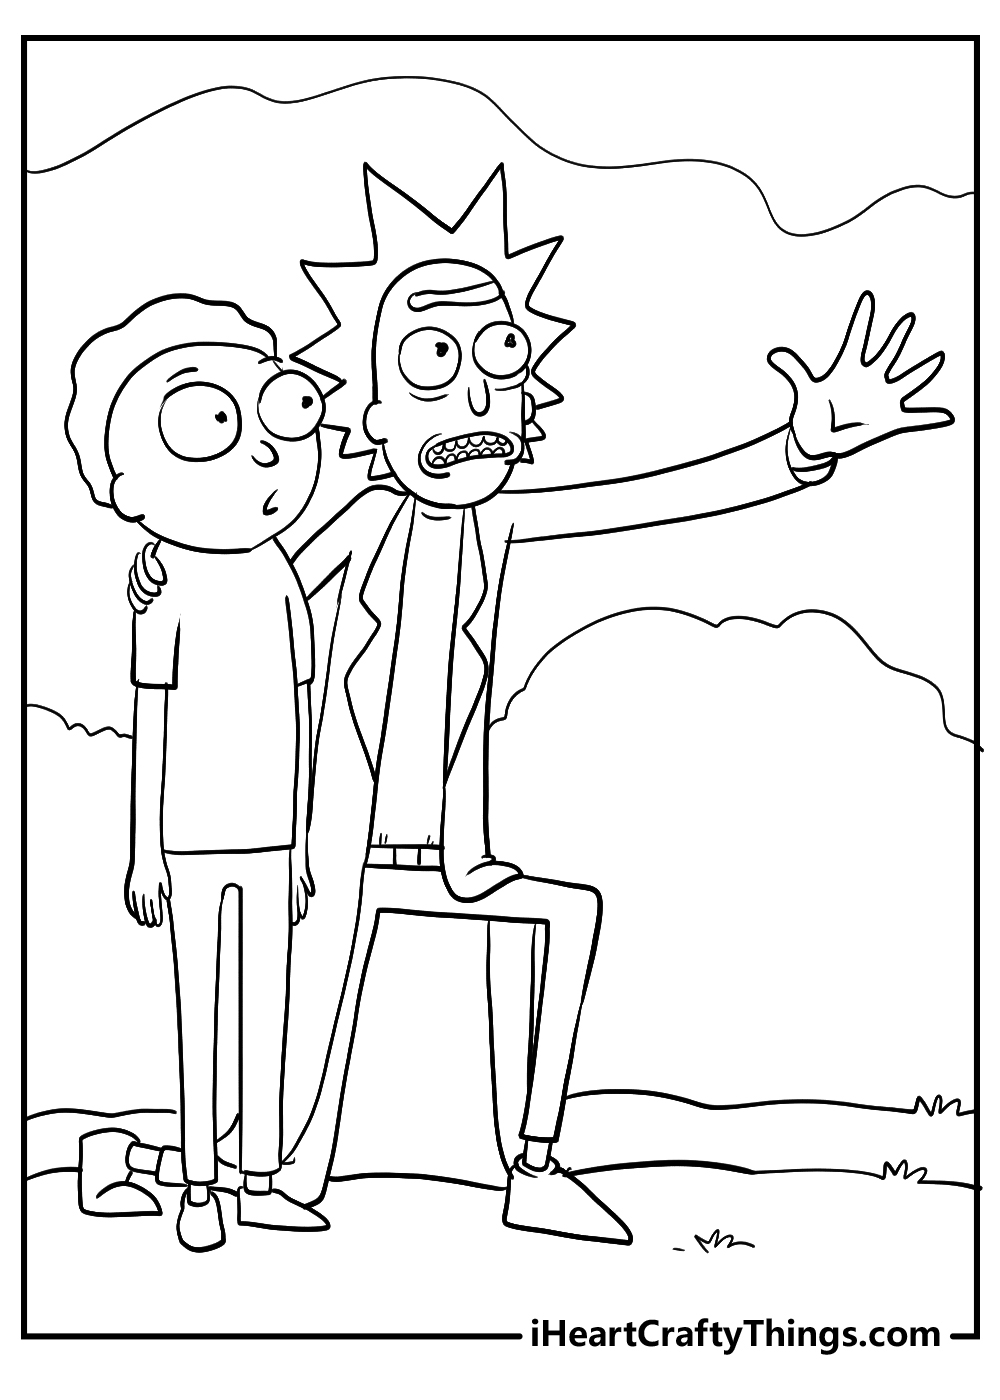 rick and morty coloring sheet free download